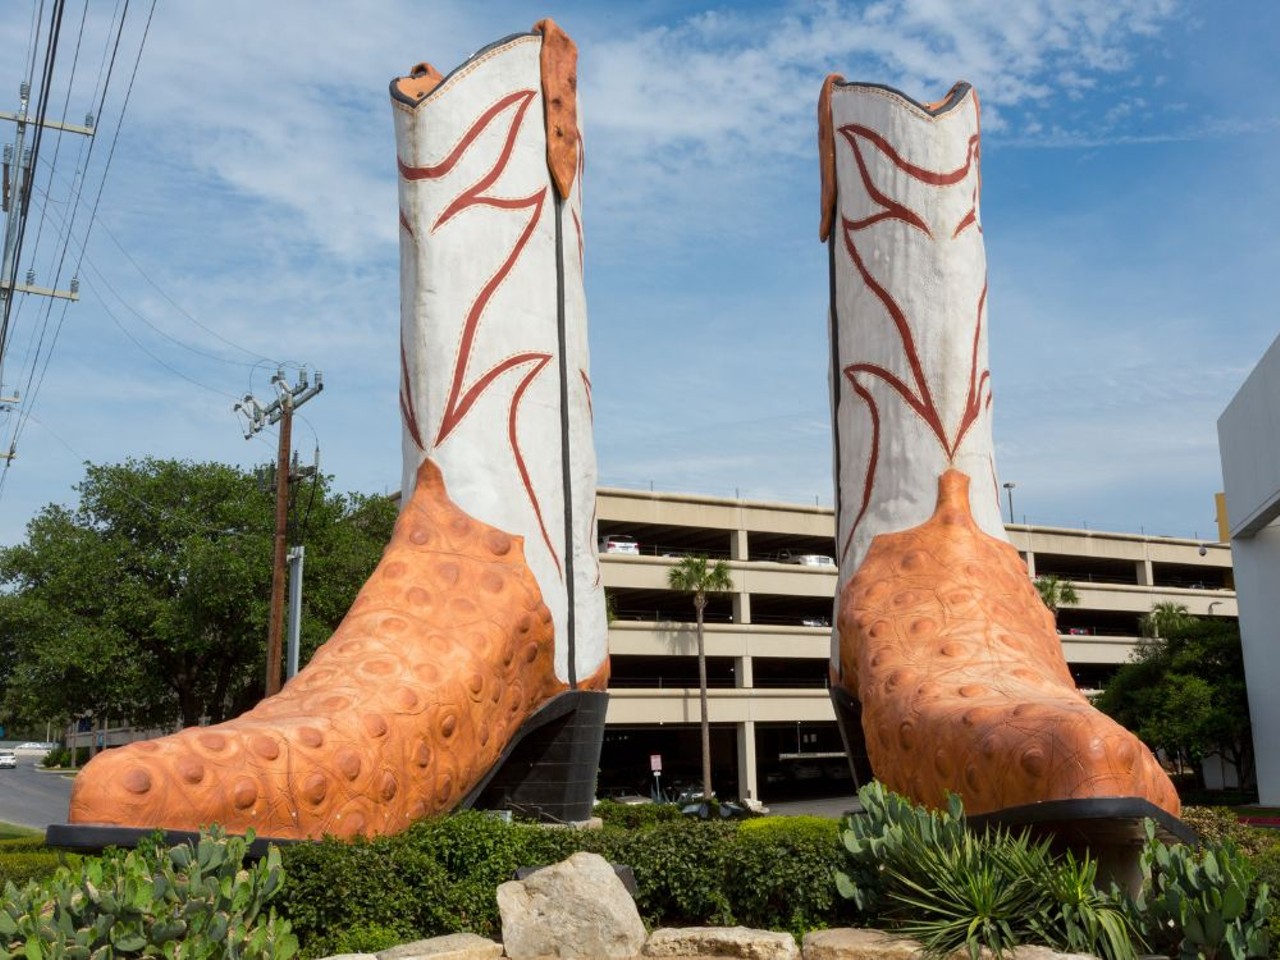 World’s Largest Cowboy Boots
North Star Mall, 7400 San Pedro Ave., San Antonio
Native San Antonians might not pay any attention to the giant cowboy boots in front of North Star Mall, but there's more to them than you'd think. Made by the larger-than-life artist Bob "Daddy-O" Wade, these boots were installed at North Star in 1979 and officially made it into the Guinness Book of World Records as the World's Largest Cowboy Boots four decades later.